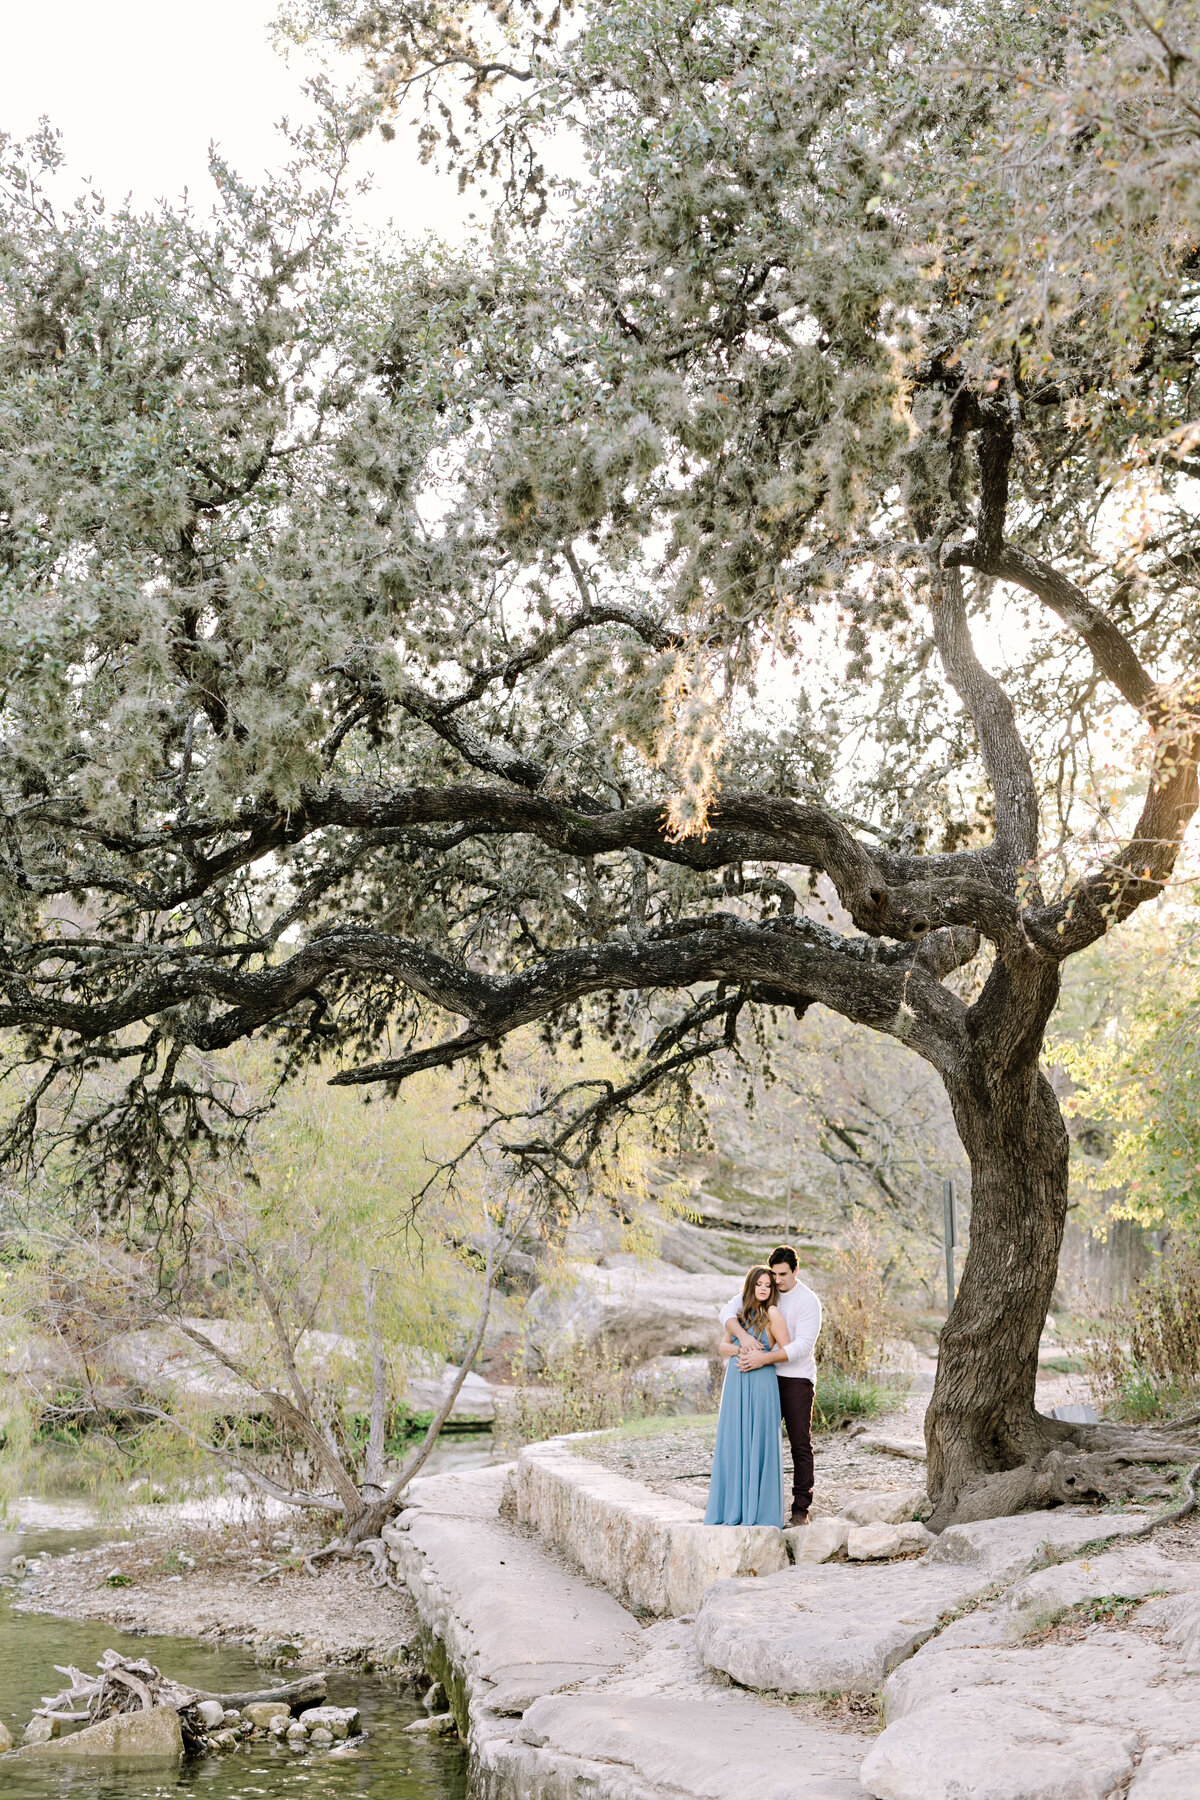 Woman in a dusty blue dress for her engagement session